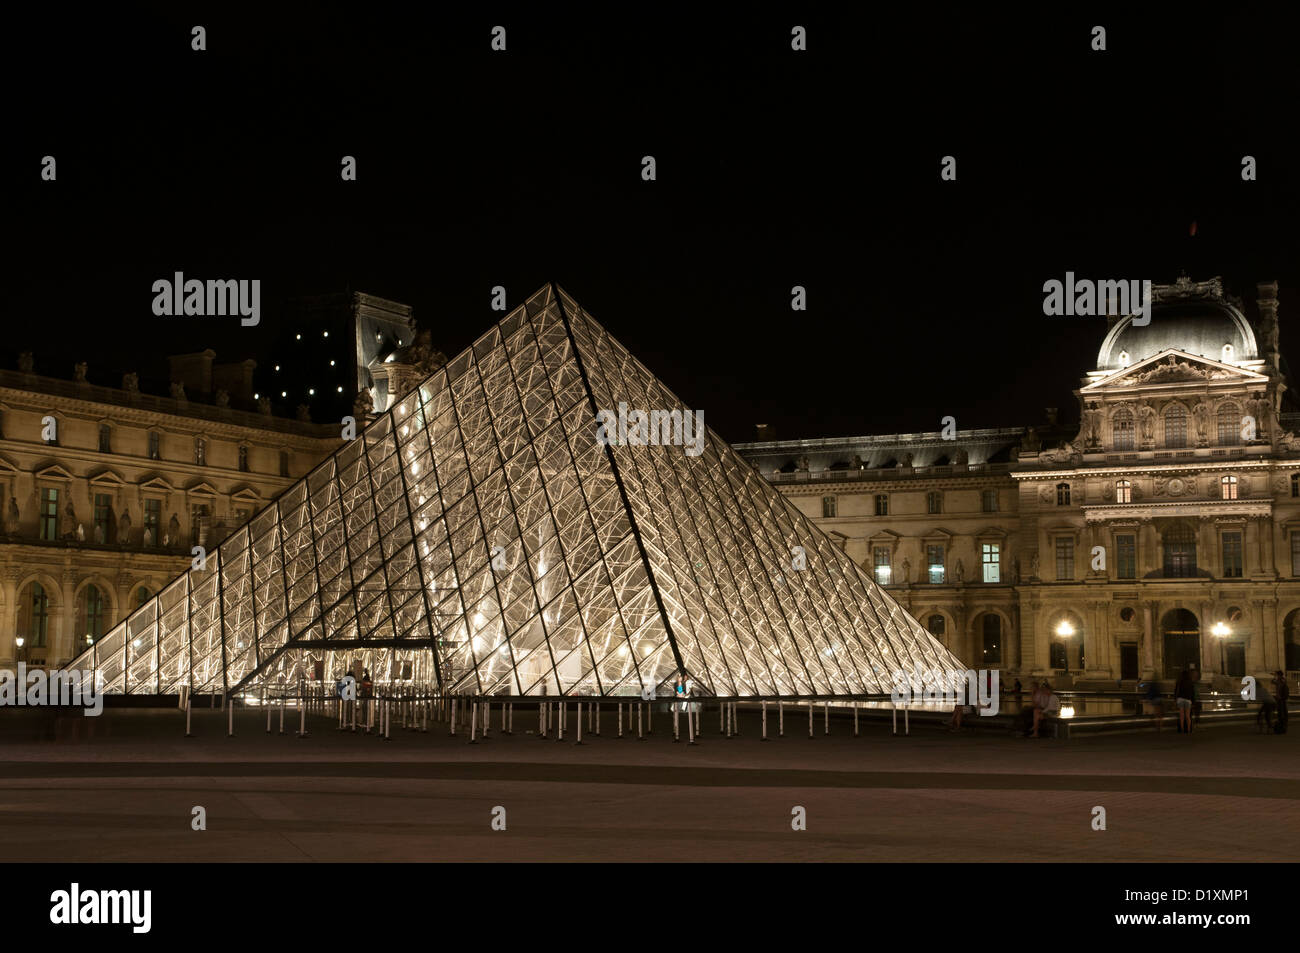 The Louvre Pyramid is a large glass and metal pyramid in the main courtyard of the Louvre Palace, Paris. Stock Photo